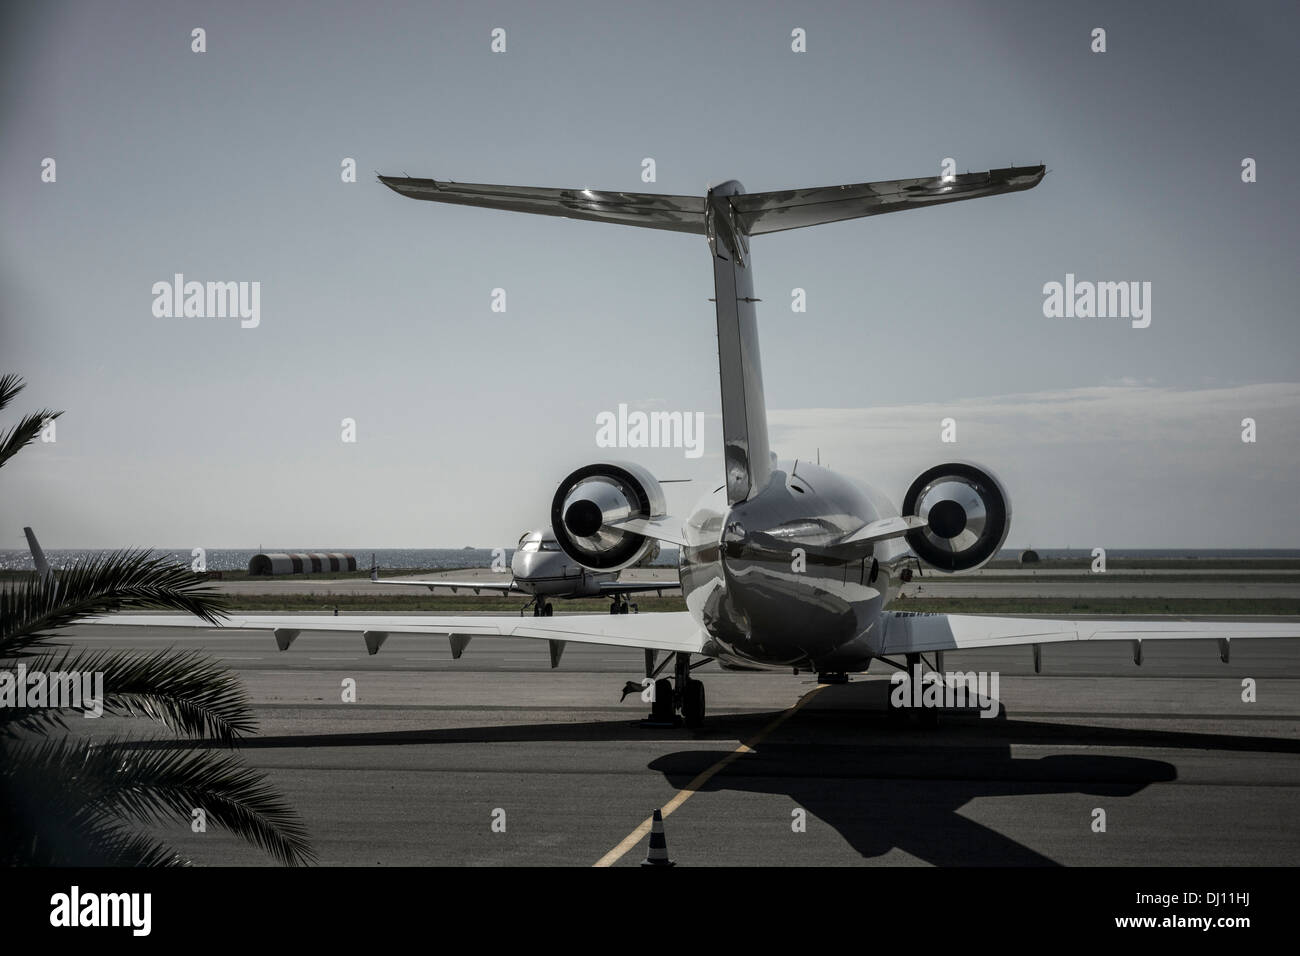 Two airplanes stationary on the tarmac Stock Photo